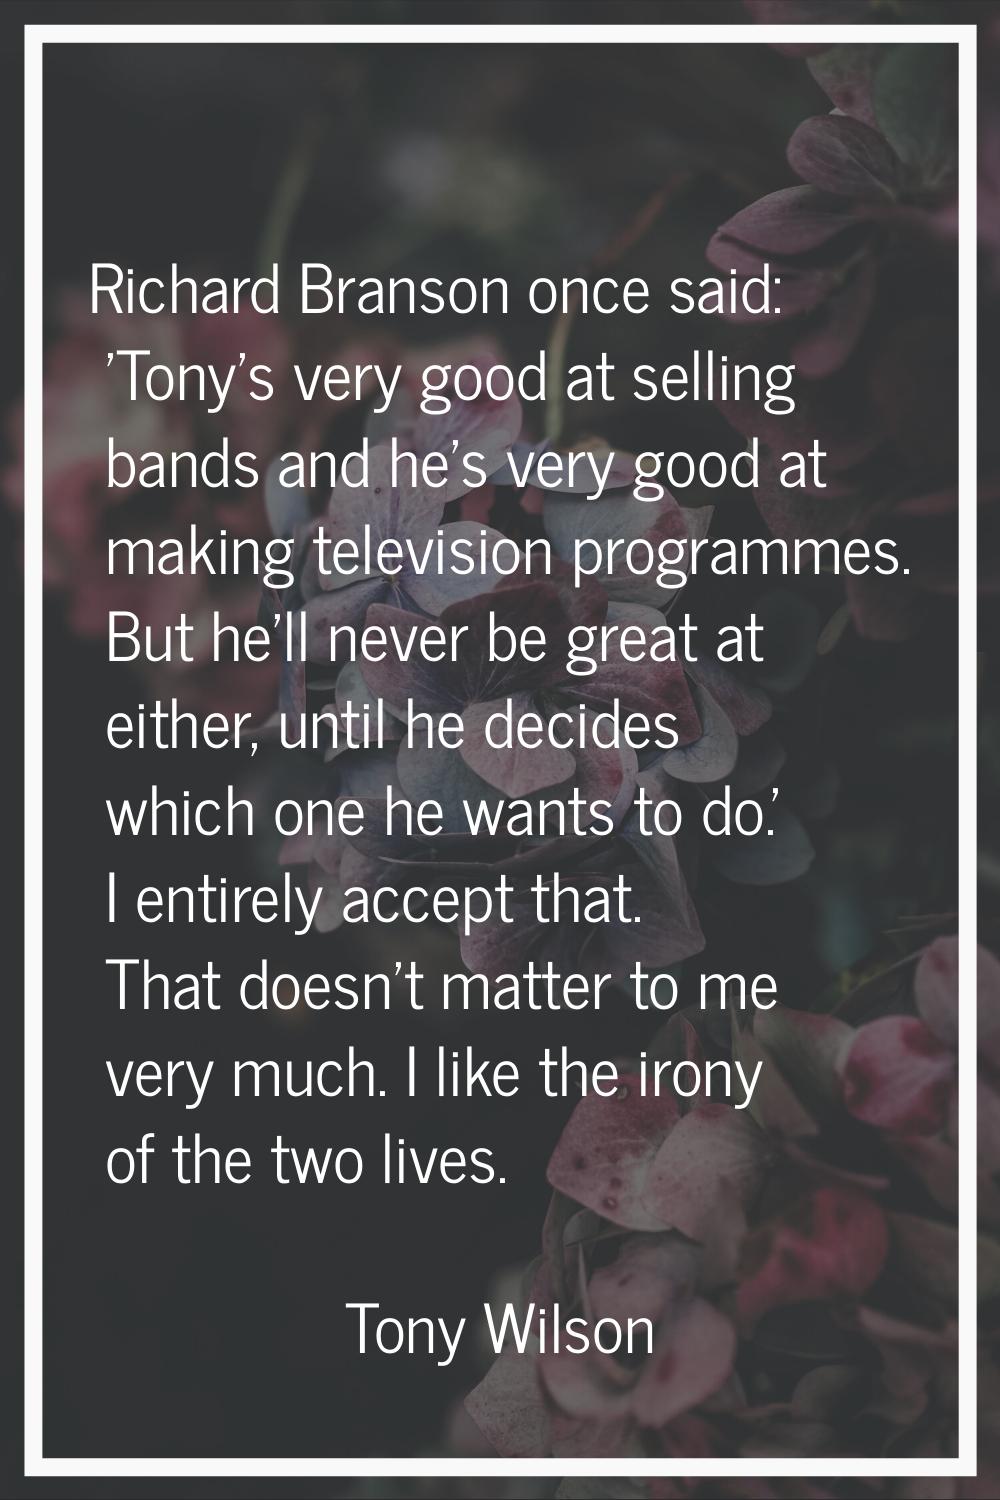 Richard Branson once said: 'Tony's very good at selling bands and he's very good at making televisi